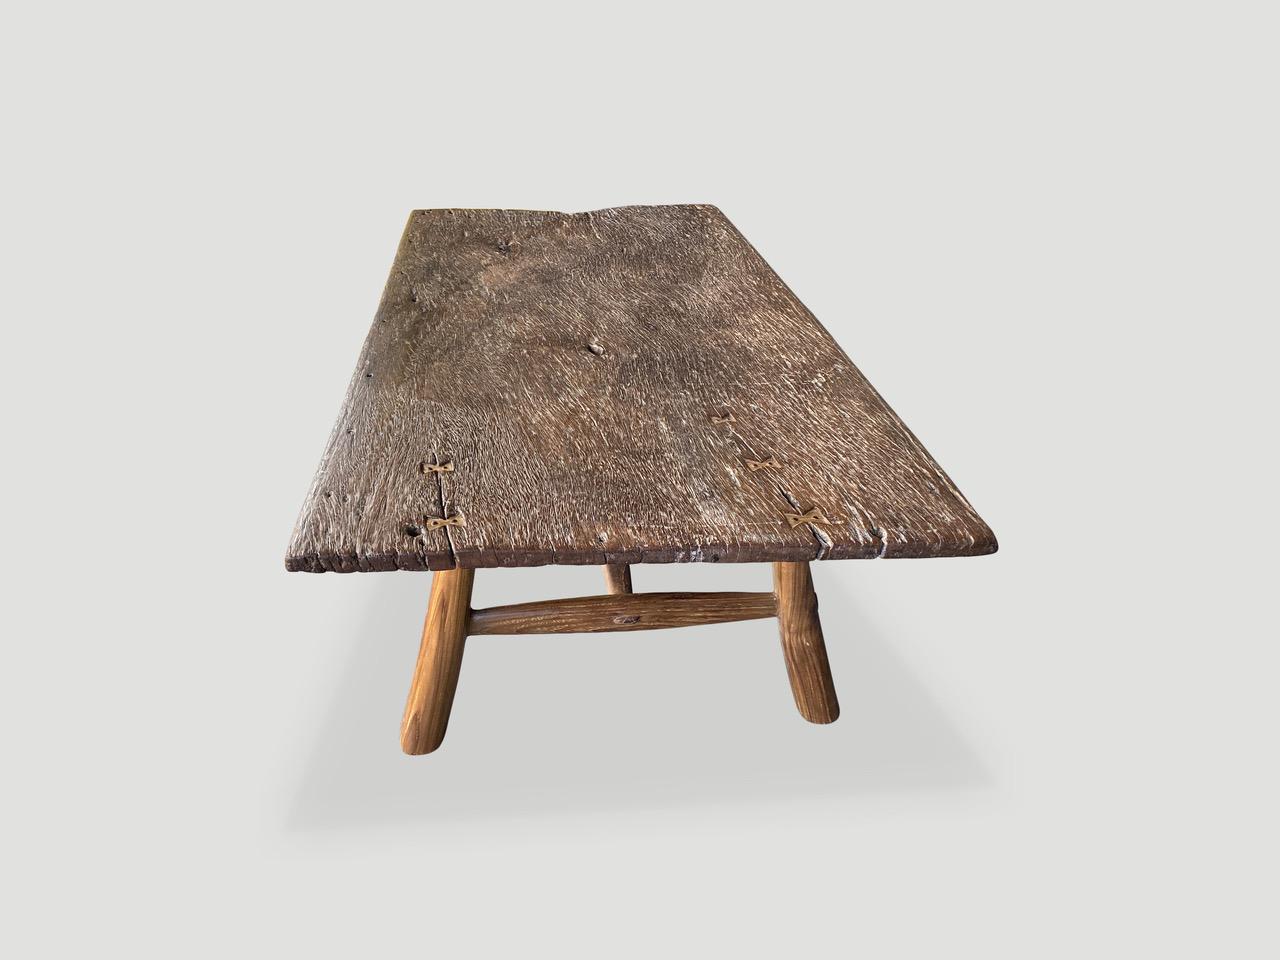 Fantastic wood grain on this single teak panel antique slab. Added butterfly detail and mid century style teak legs. Rare.

This coffee table was hand made in the spirit of Wabi-Sabi, a Japanese philosophy that beauty can be found in imperfection